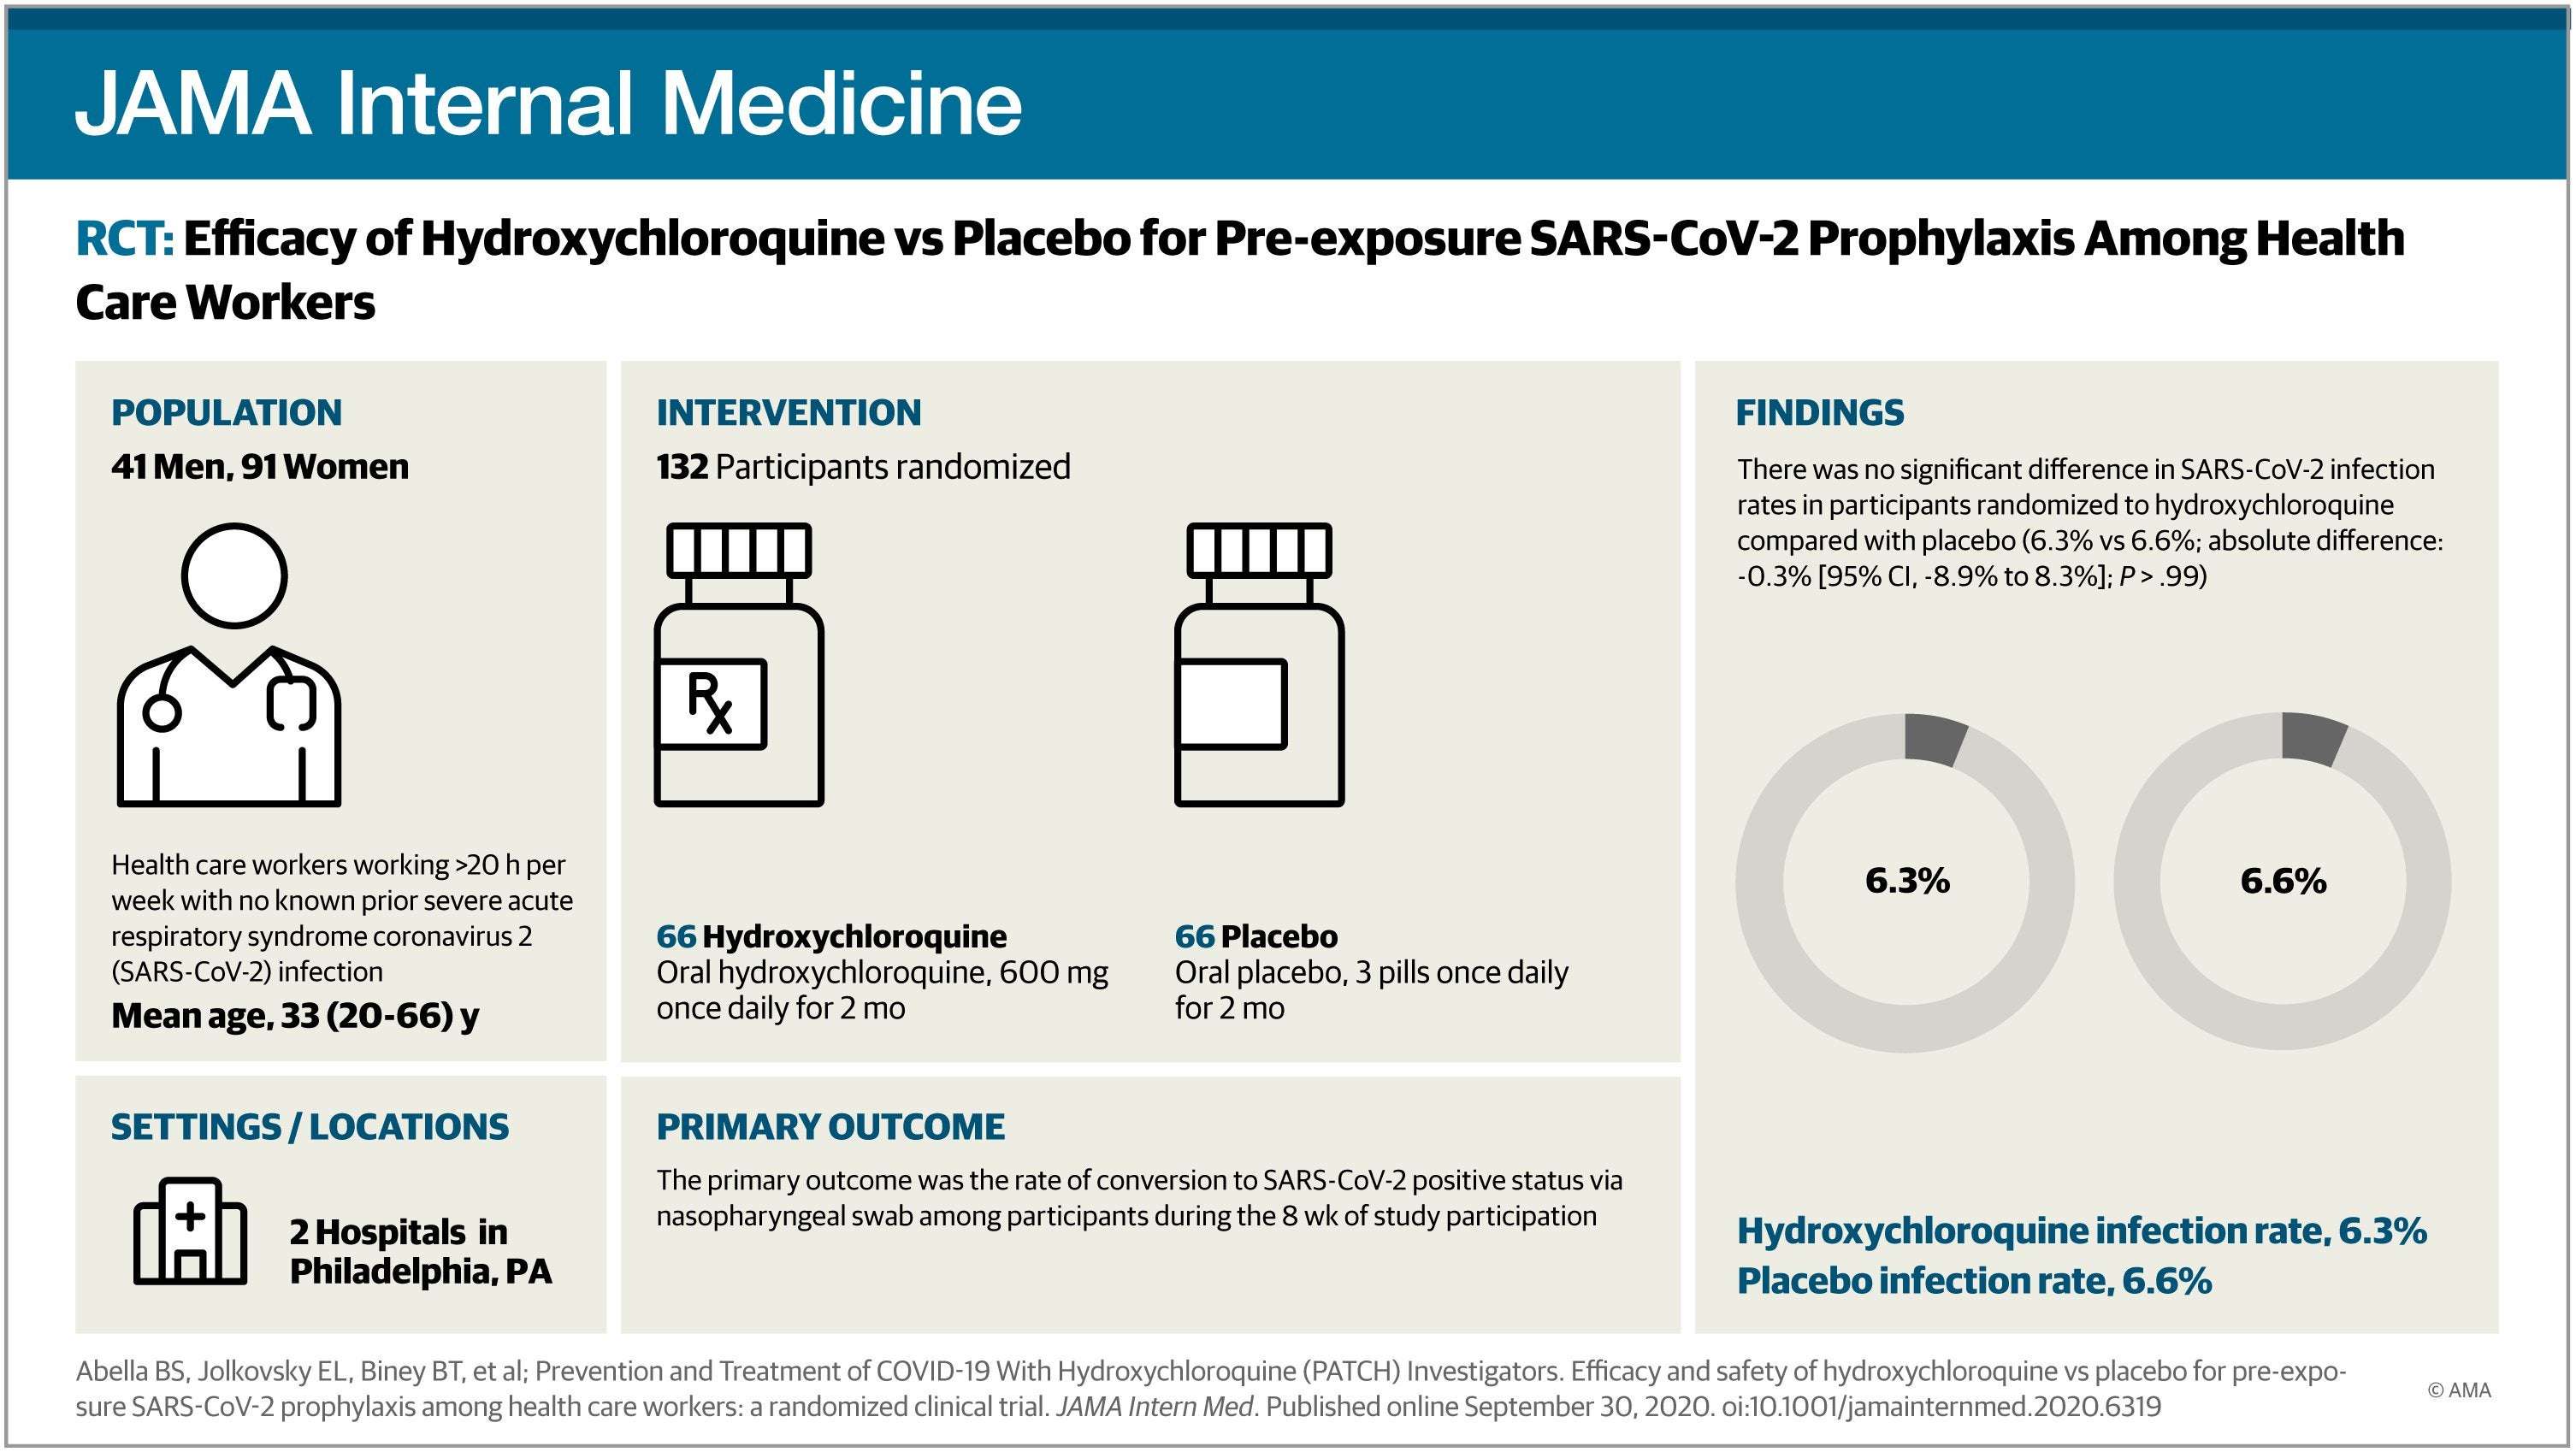 image for Efficacy and Safety of Hydroxychloroquine vs Placebo for Pre-exposure SARS-CoV-2 Prophylaxis Among Health Care Workers